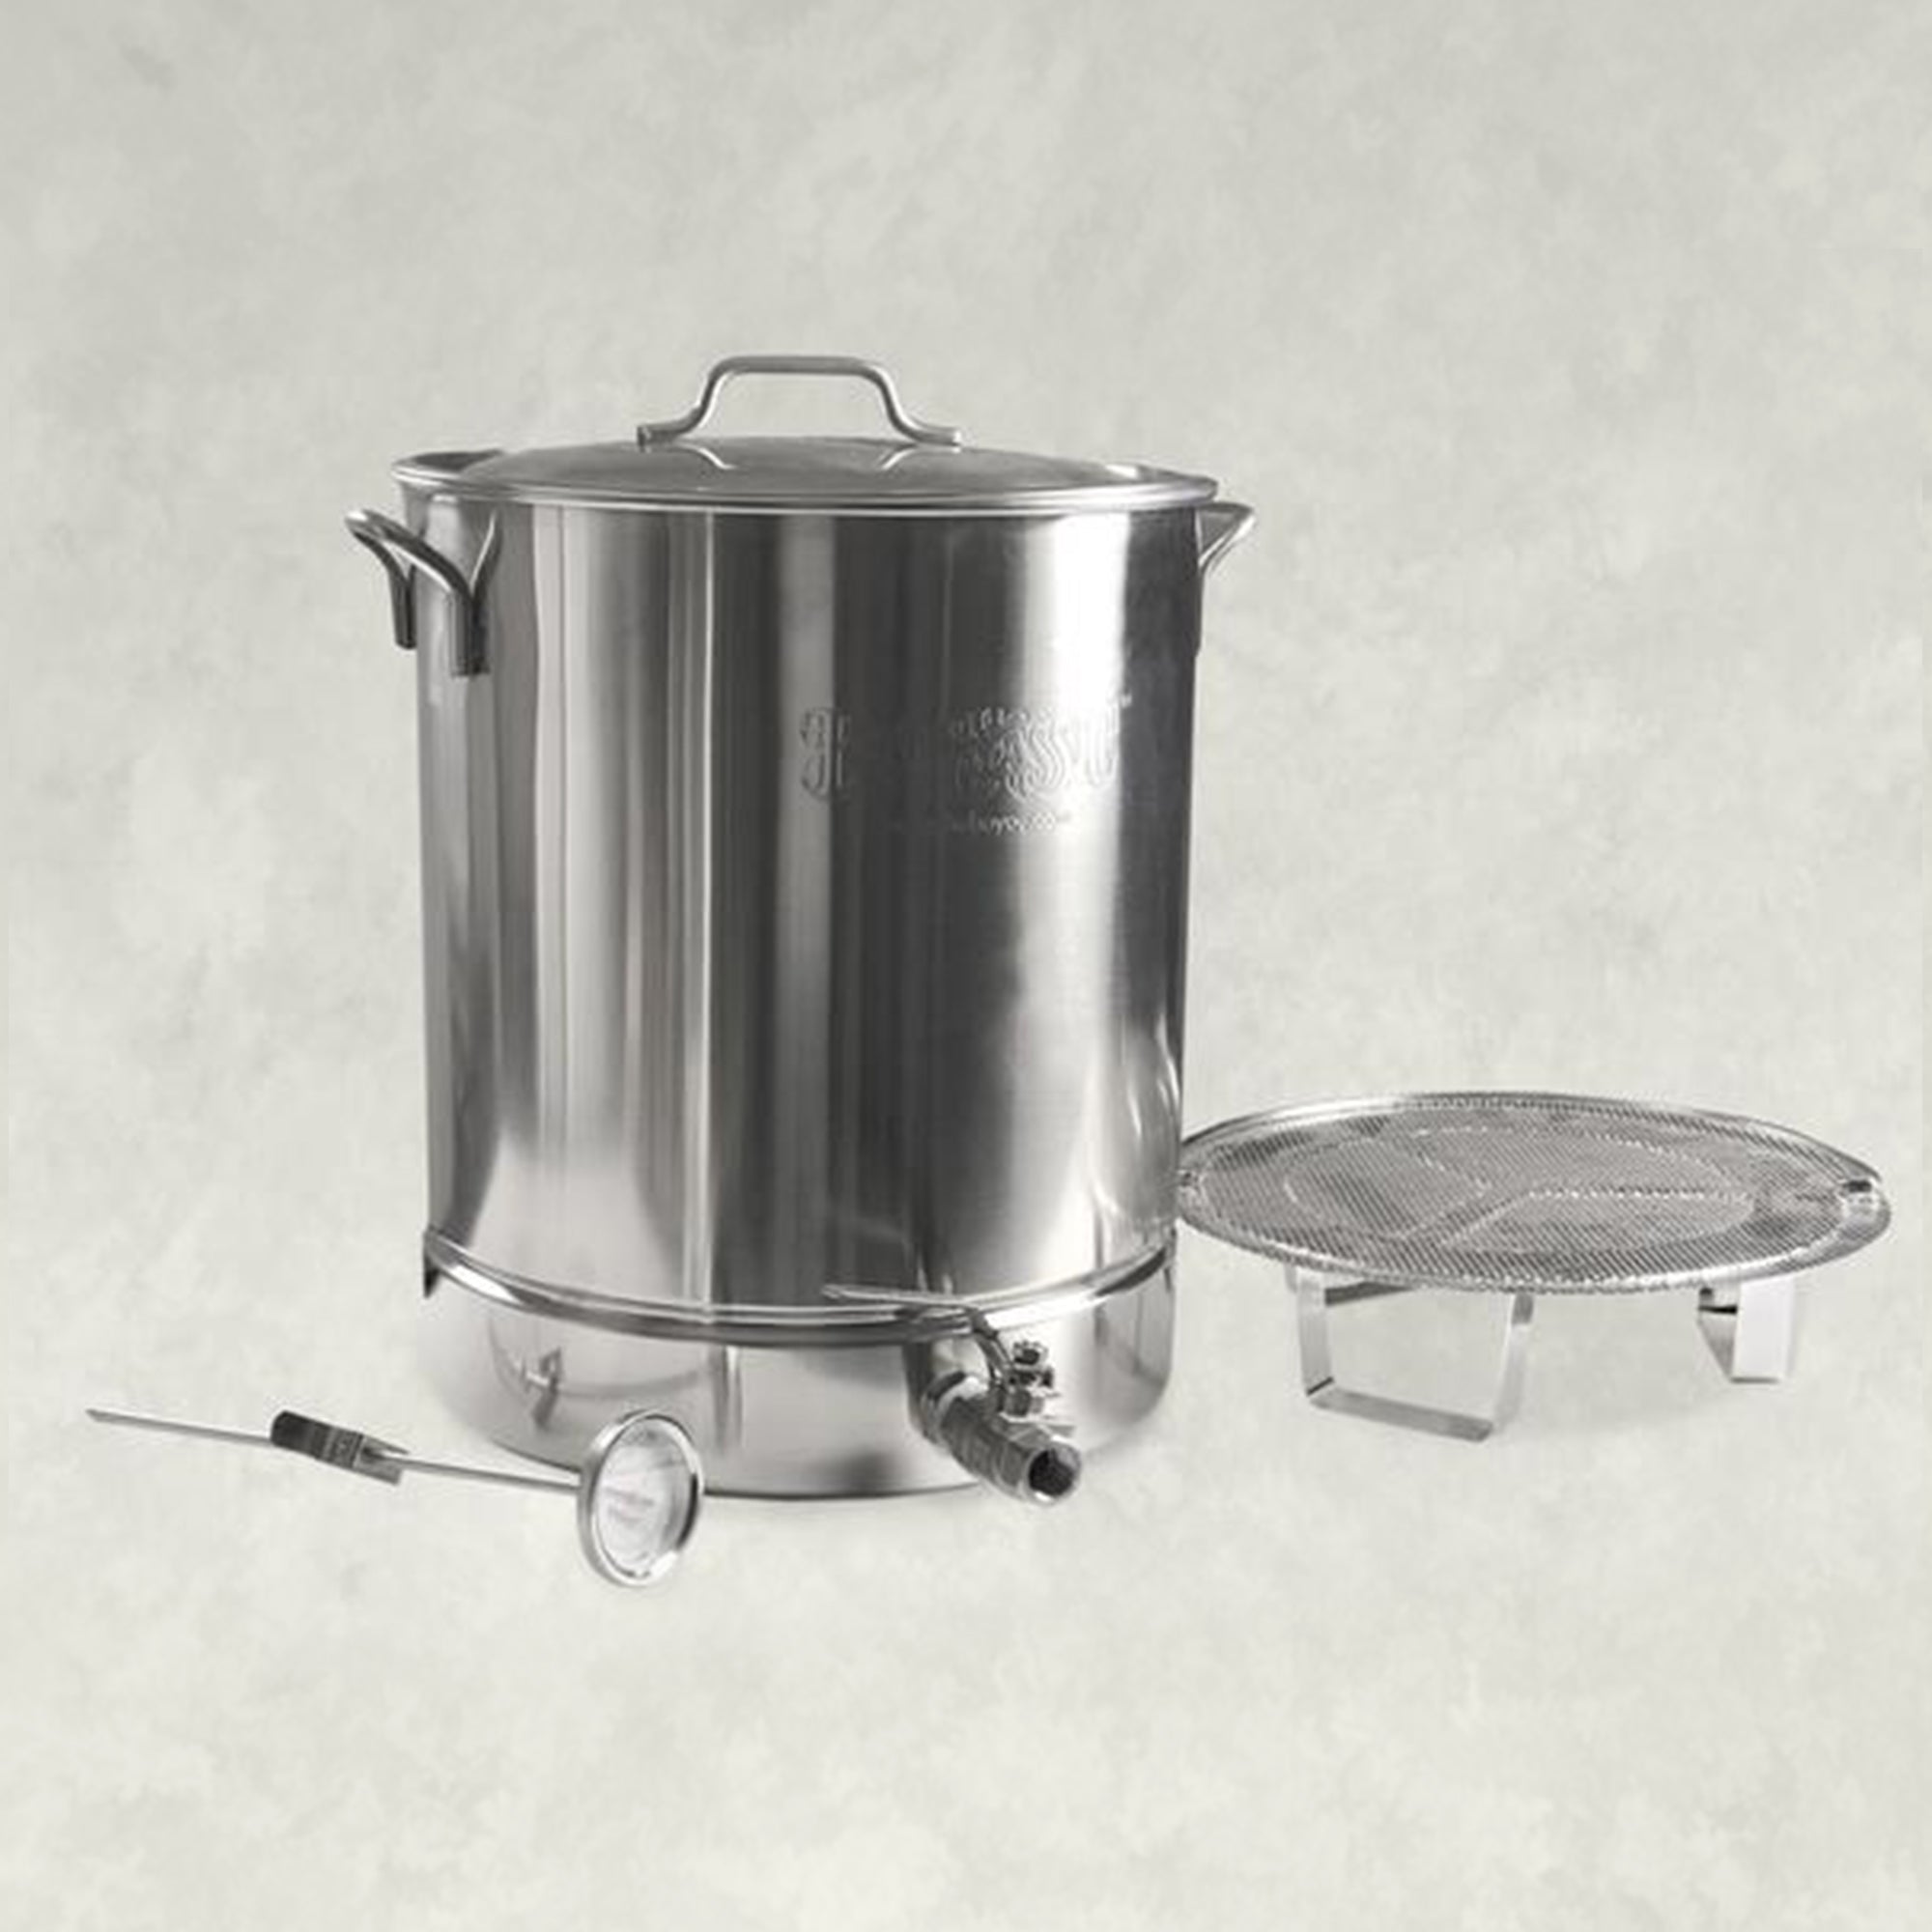 Stainless Stockpot with Spigot, False Bottom and Thermometer